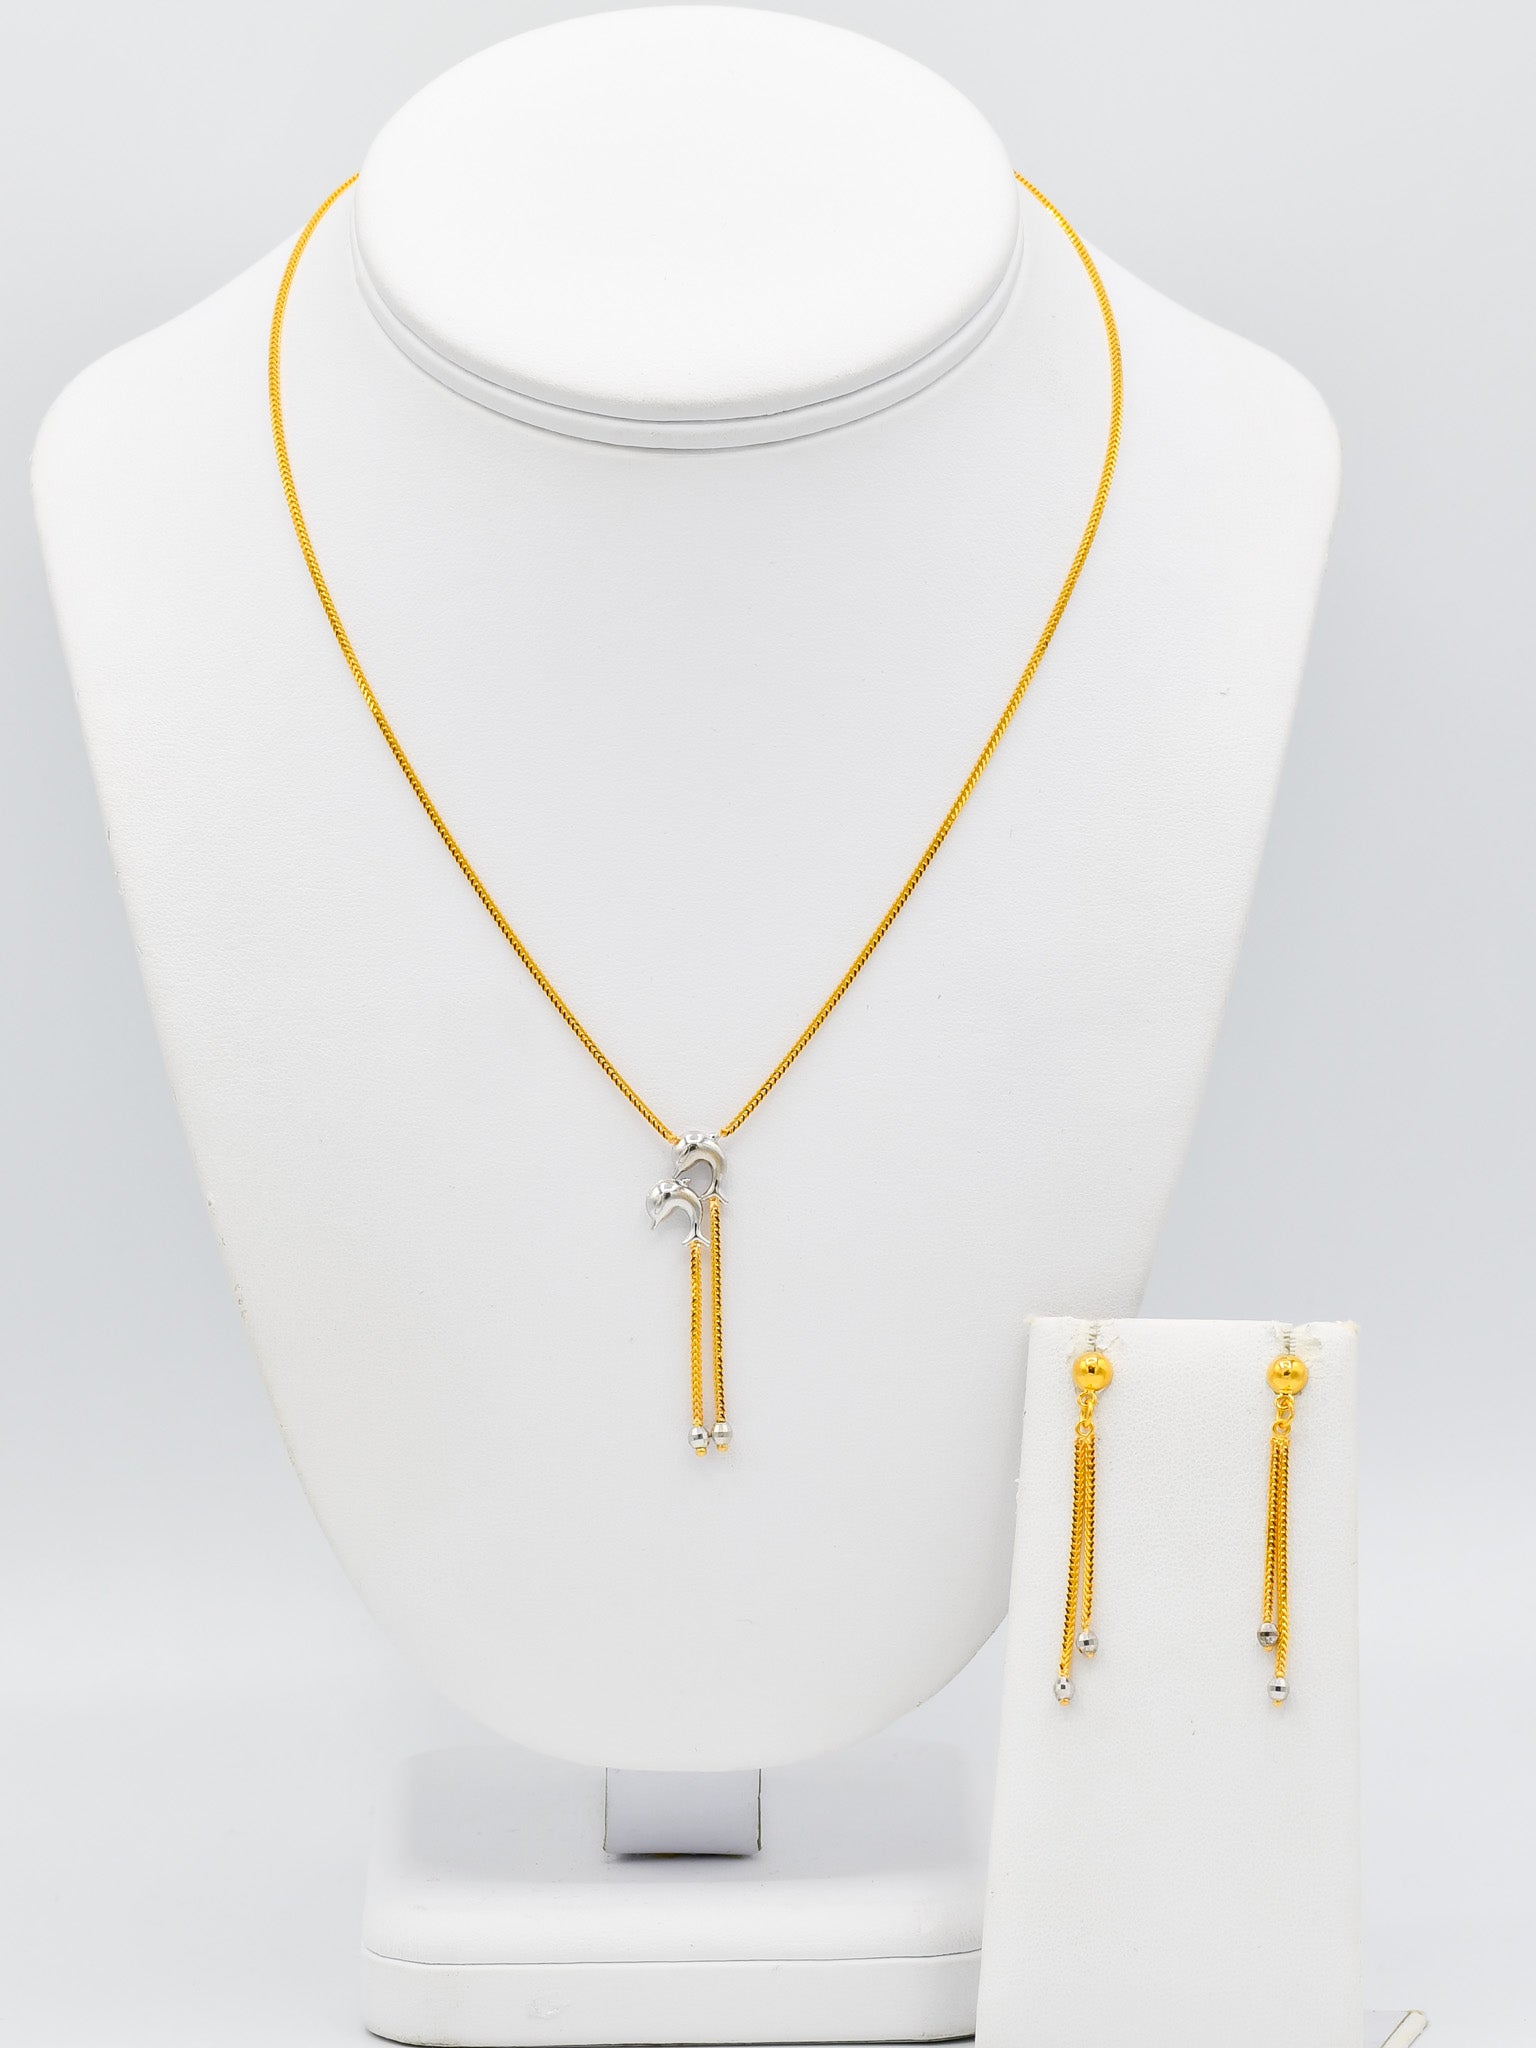 22ct Gold Two Tone Dolphine Necklace Set - Roop Darshan